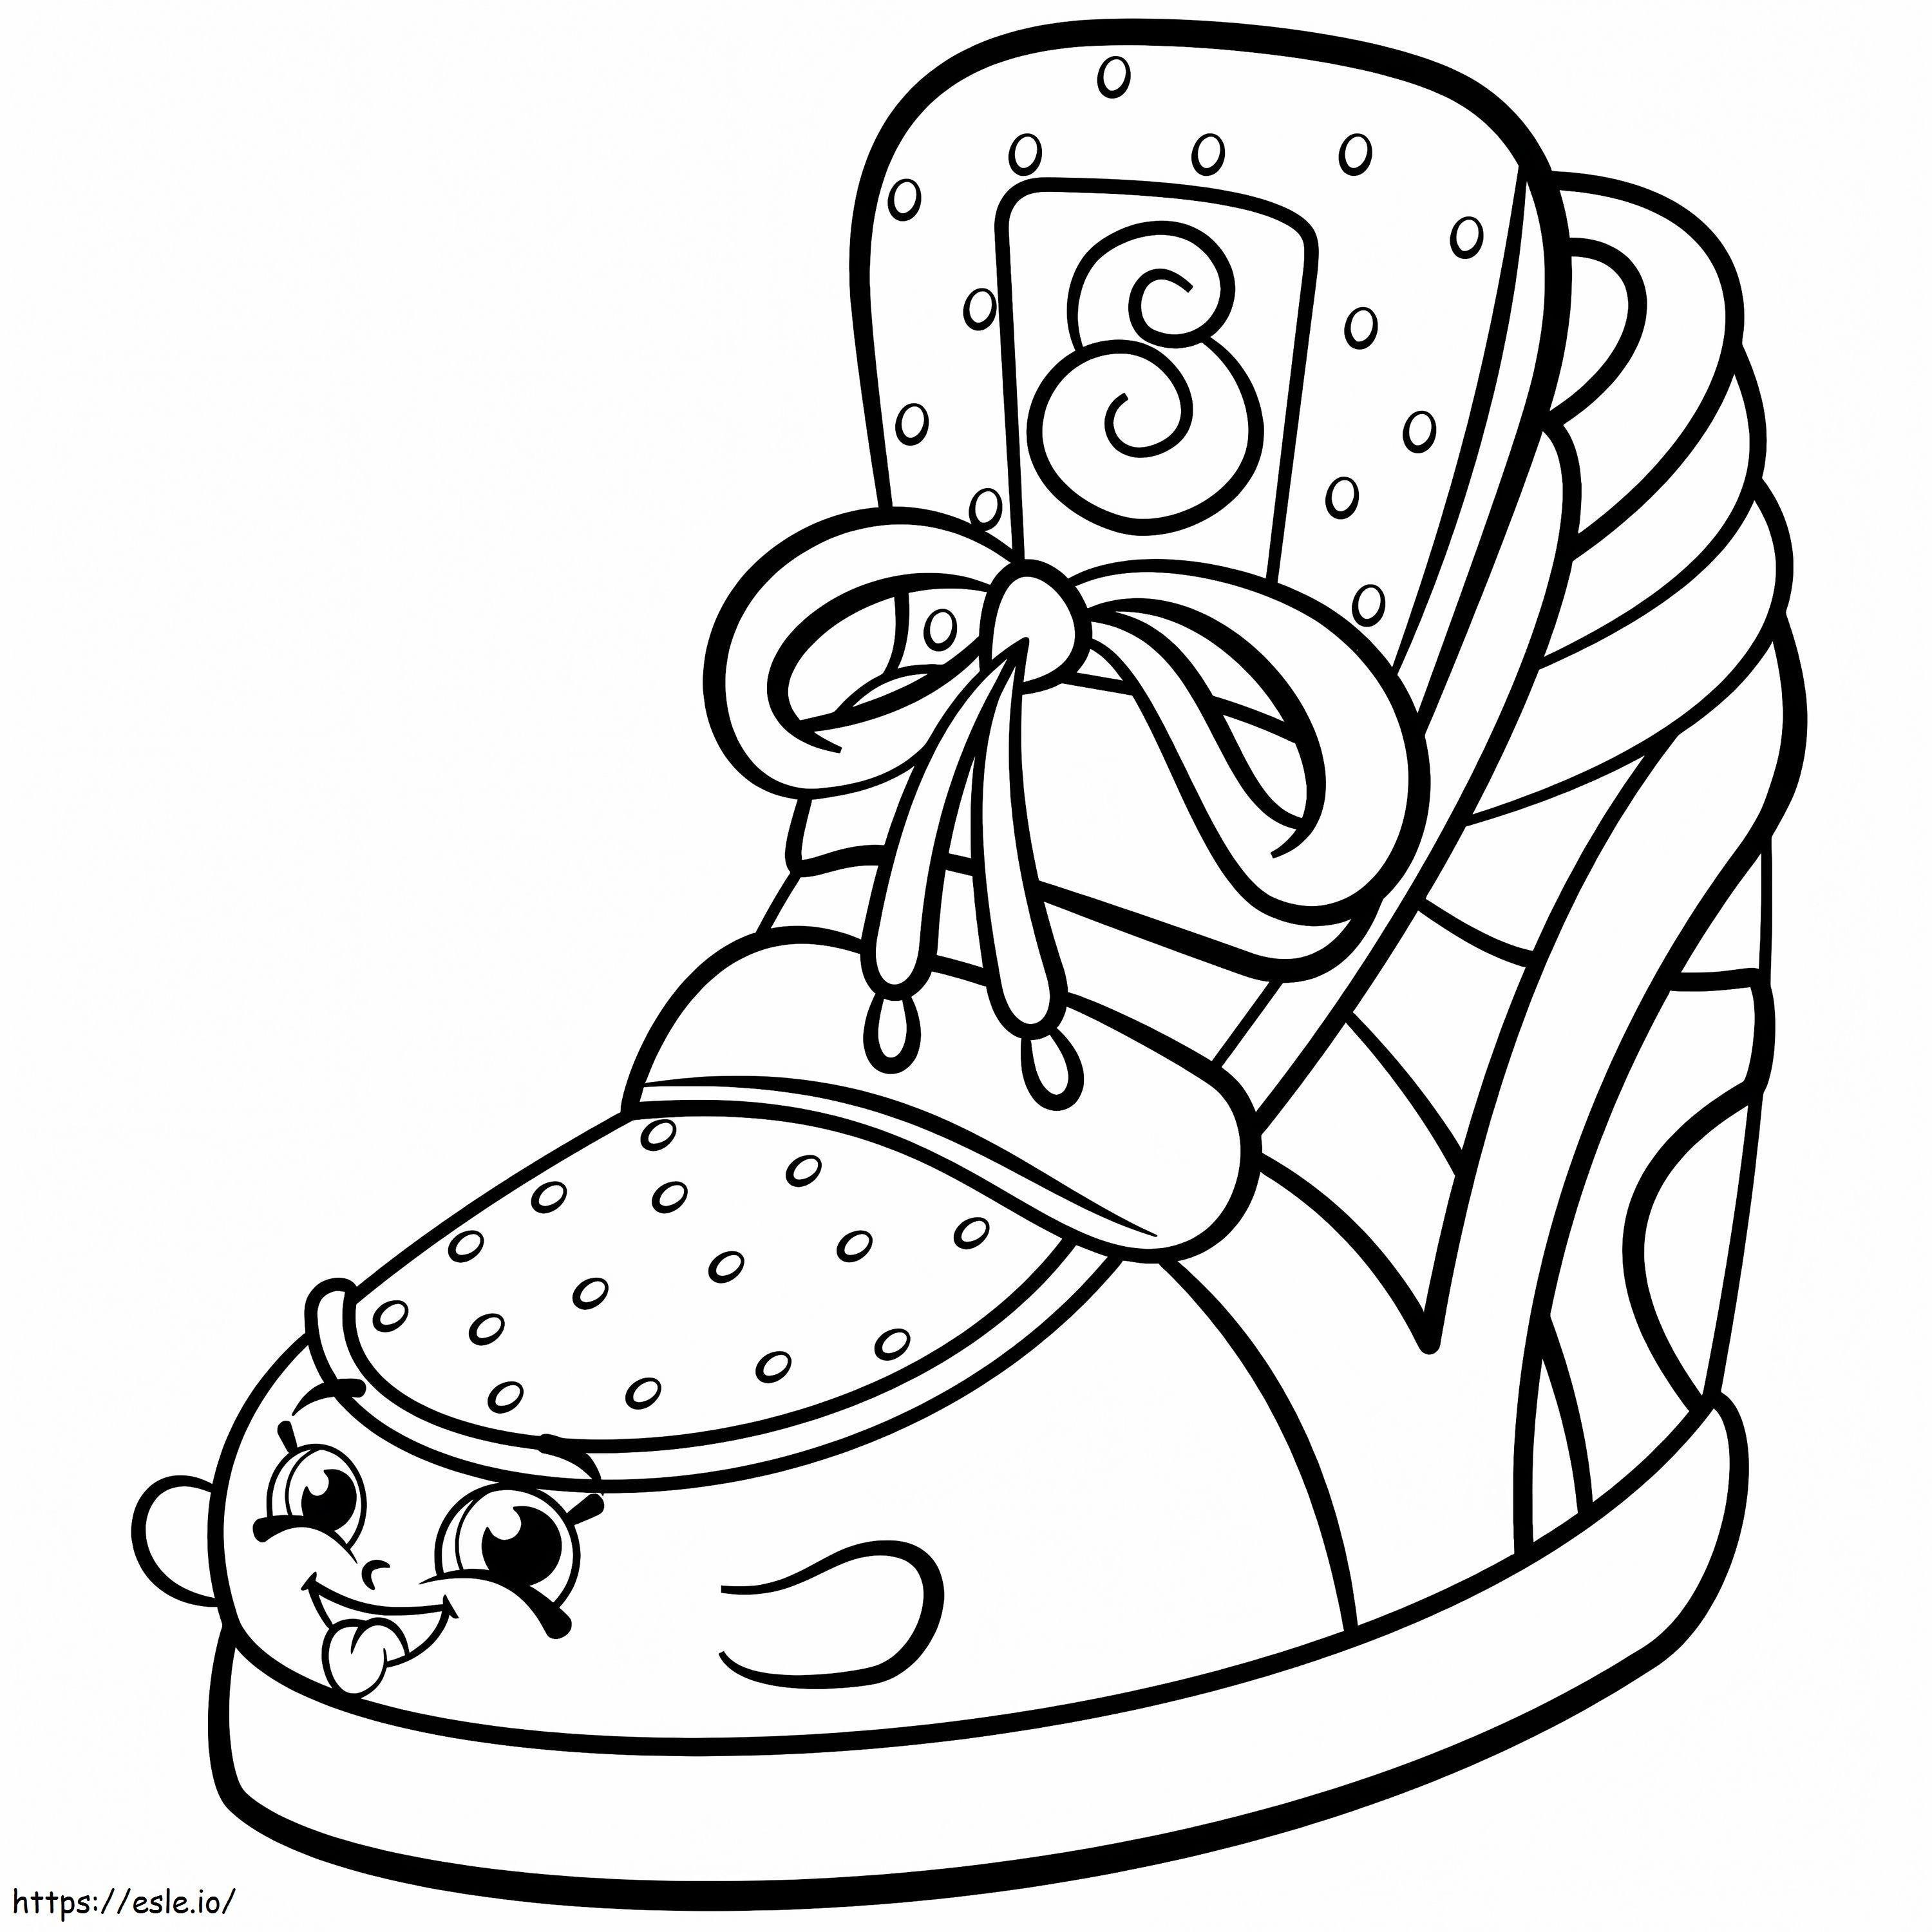 Sneaky Wedge Shopkins coloring page